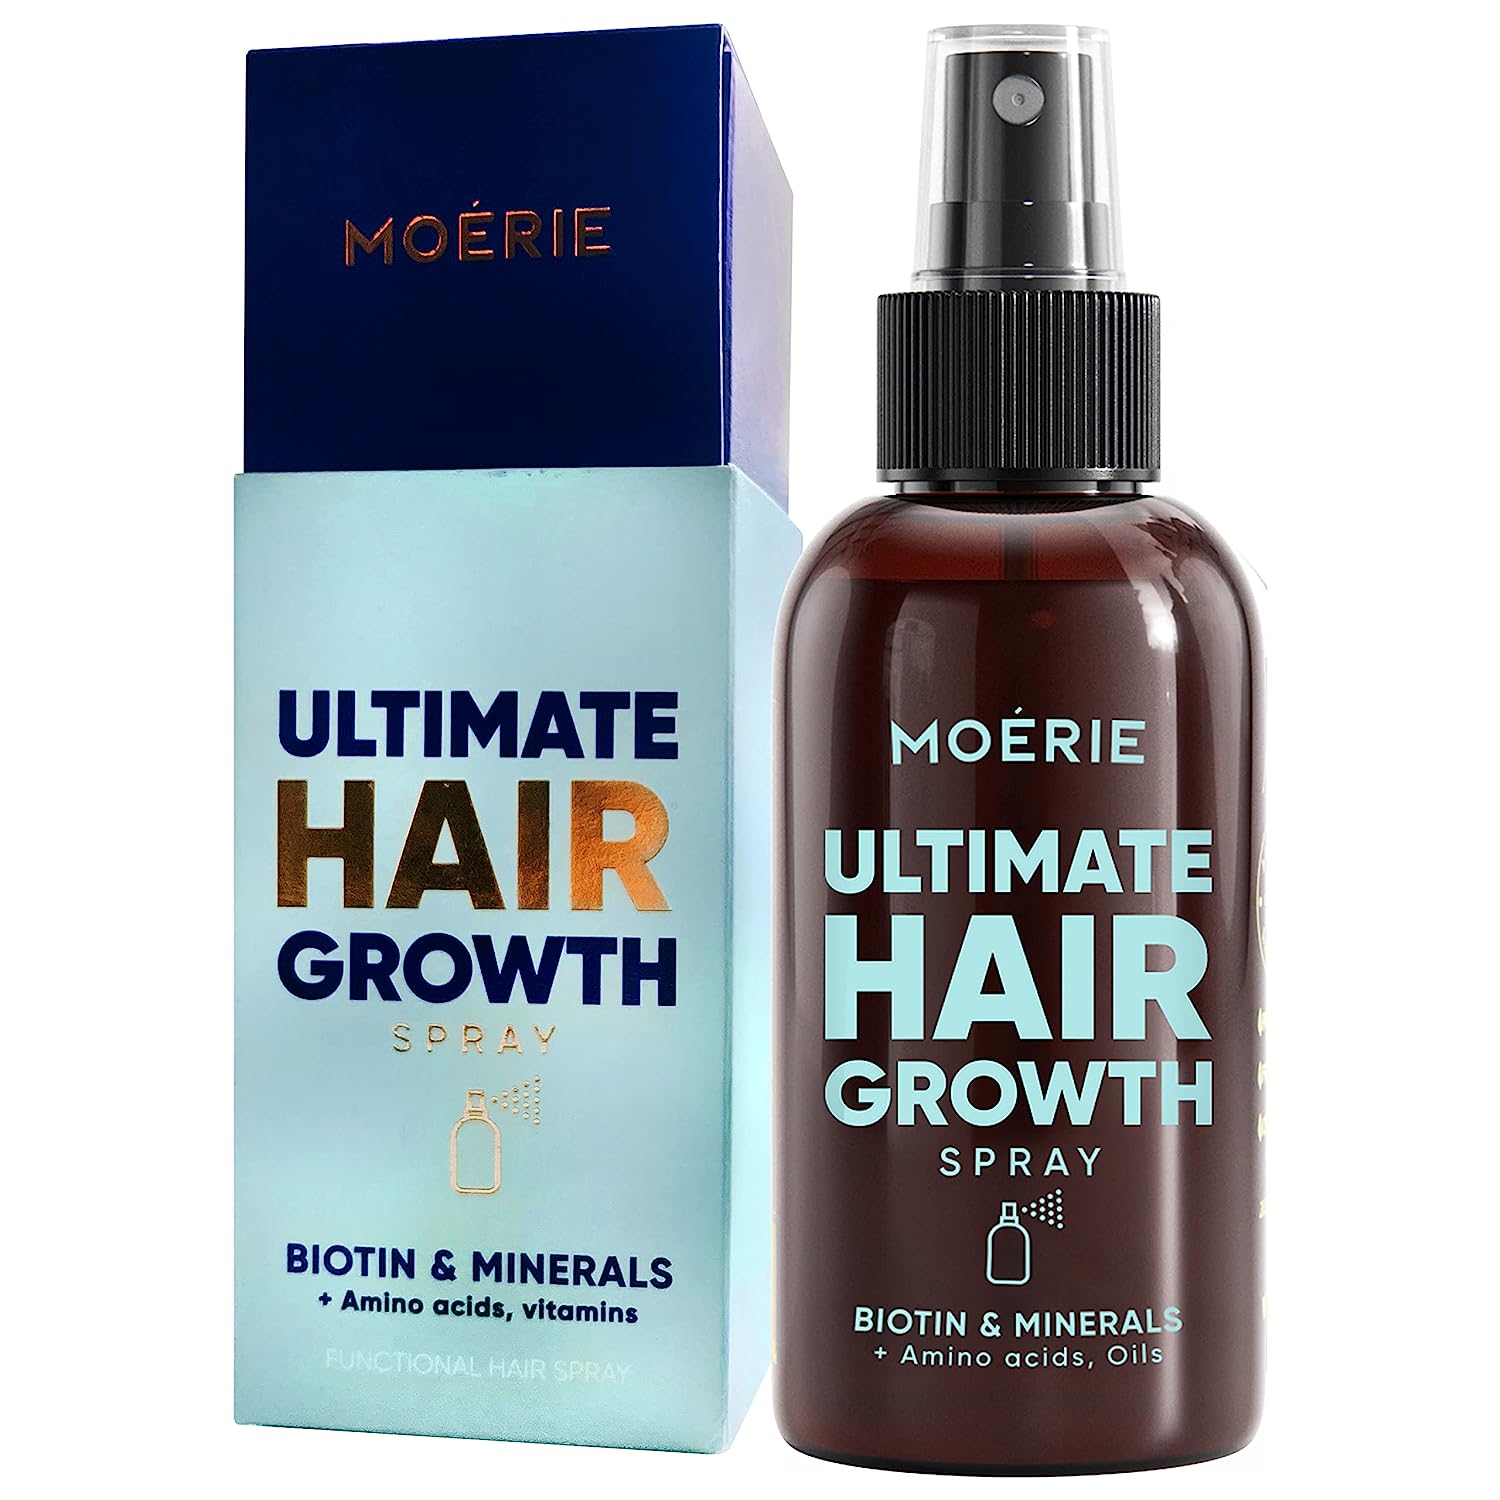 Moerie Ultimate Hair Growth Spray Designed to [...]